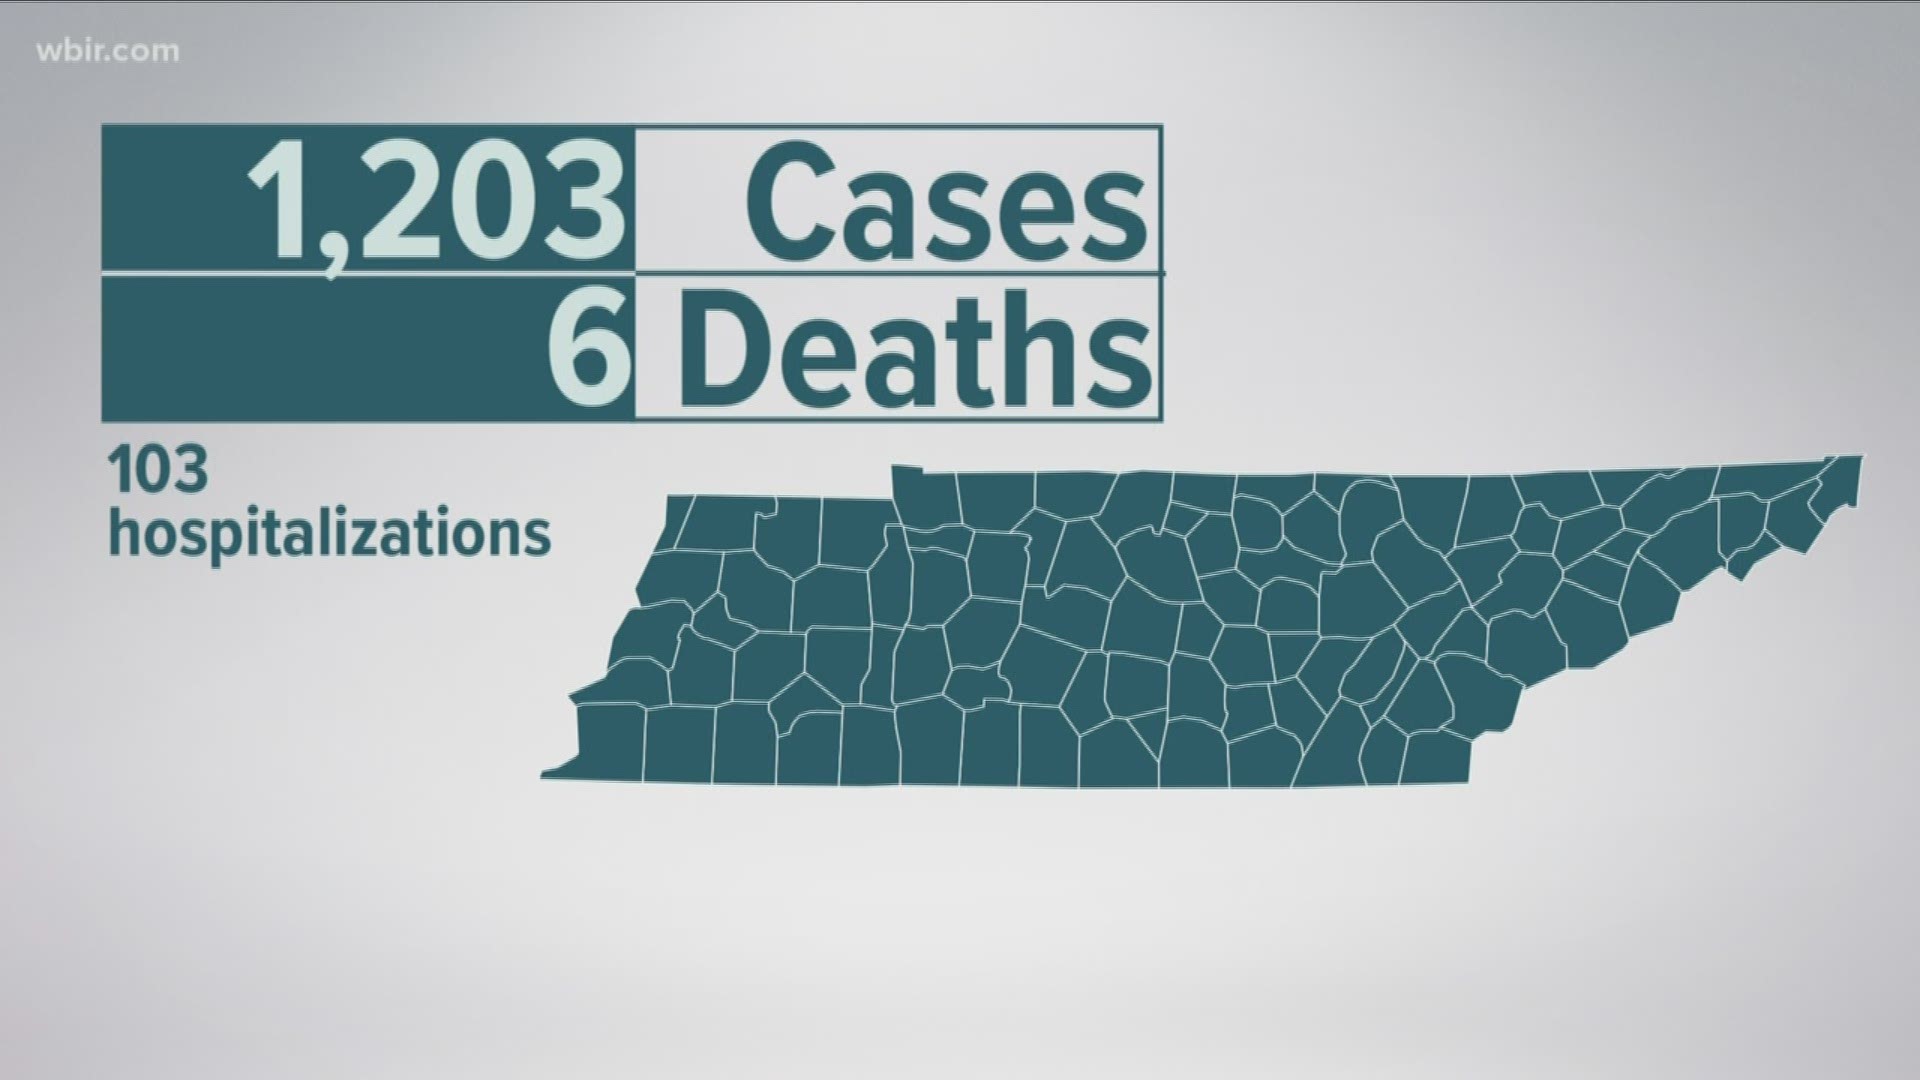 Virus cases Friday, March 27, climbed to more than 1,200 in Tennessee. Knox County also saw an increase.